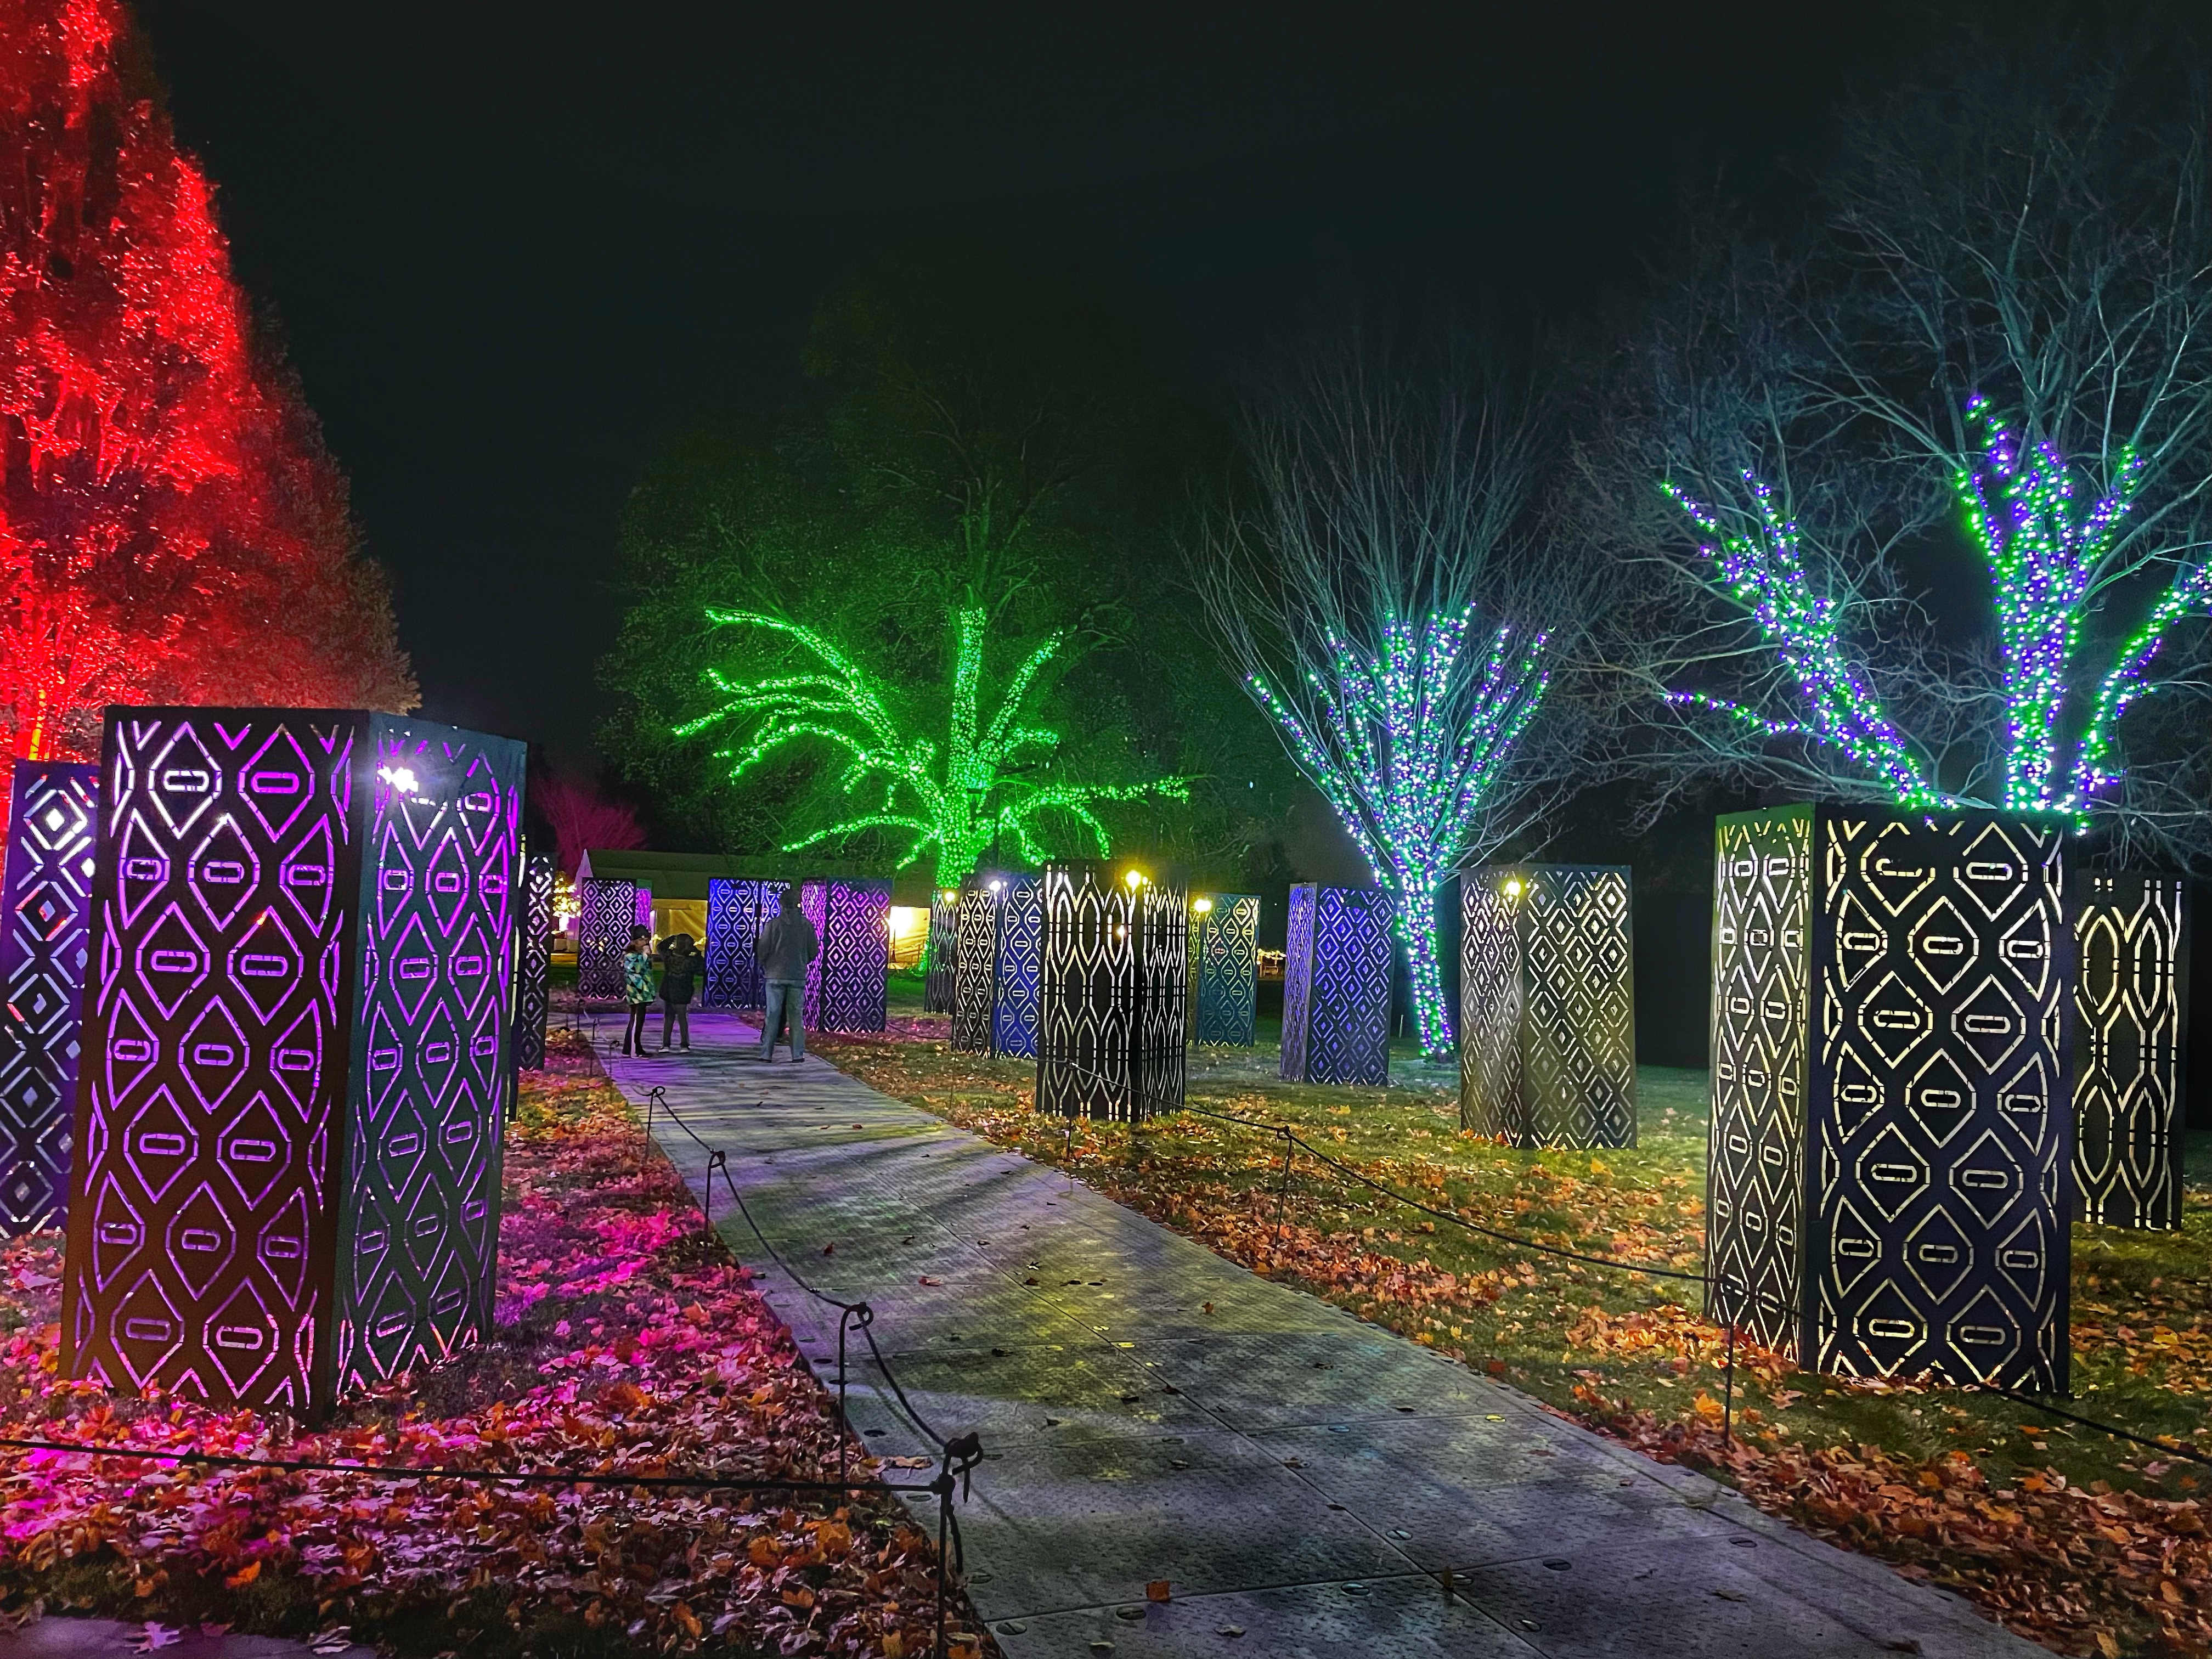 Meadow Brook's Holiday Walk and Winter Wonder Lights